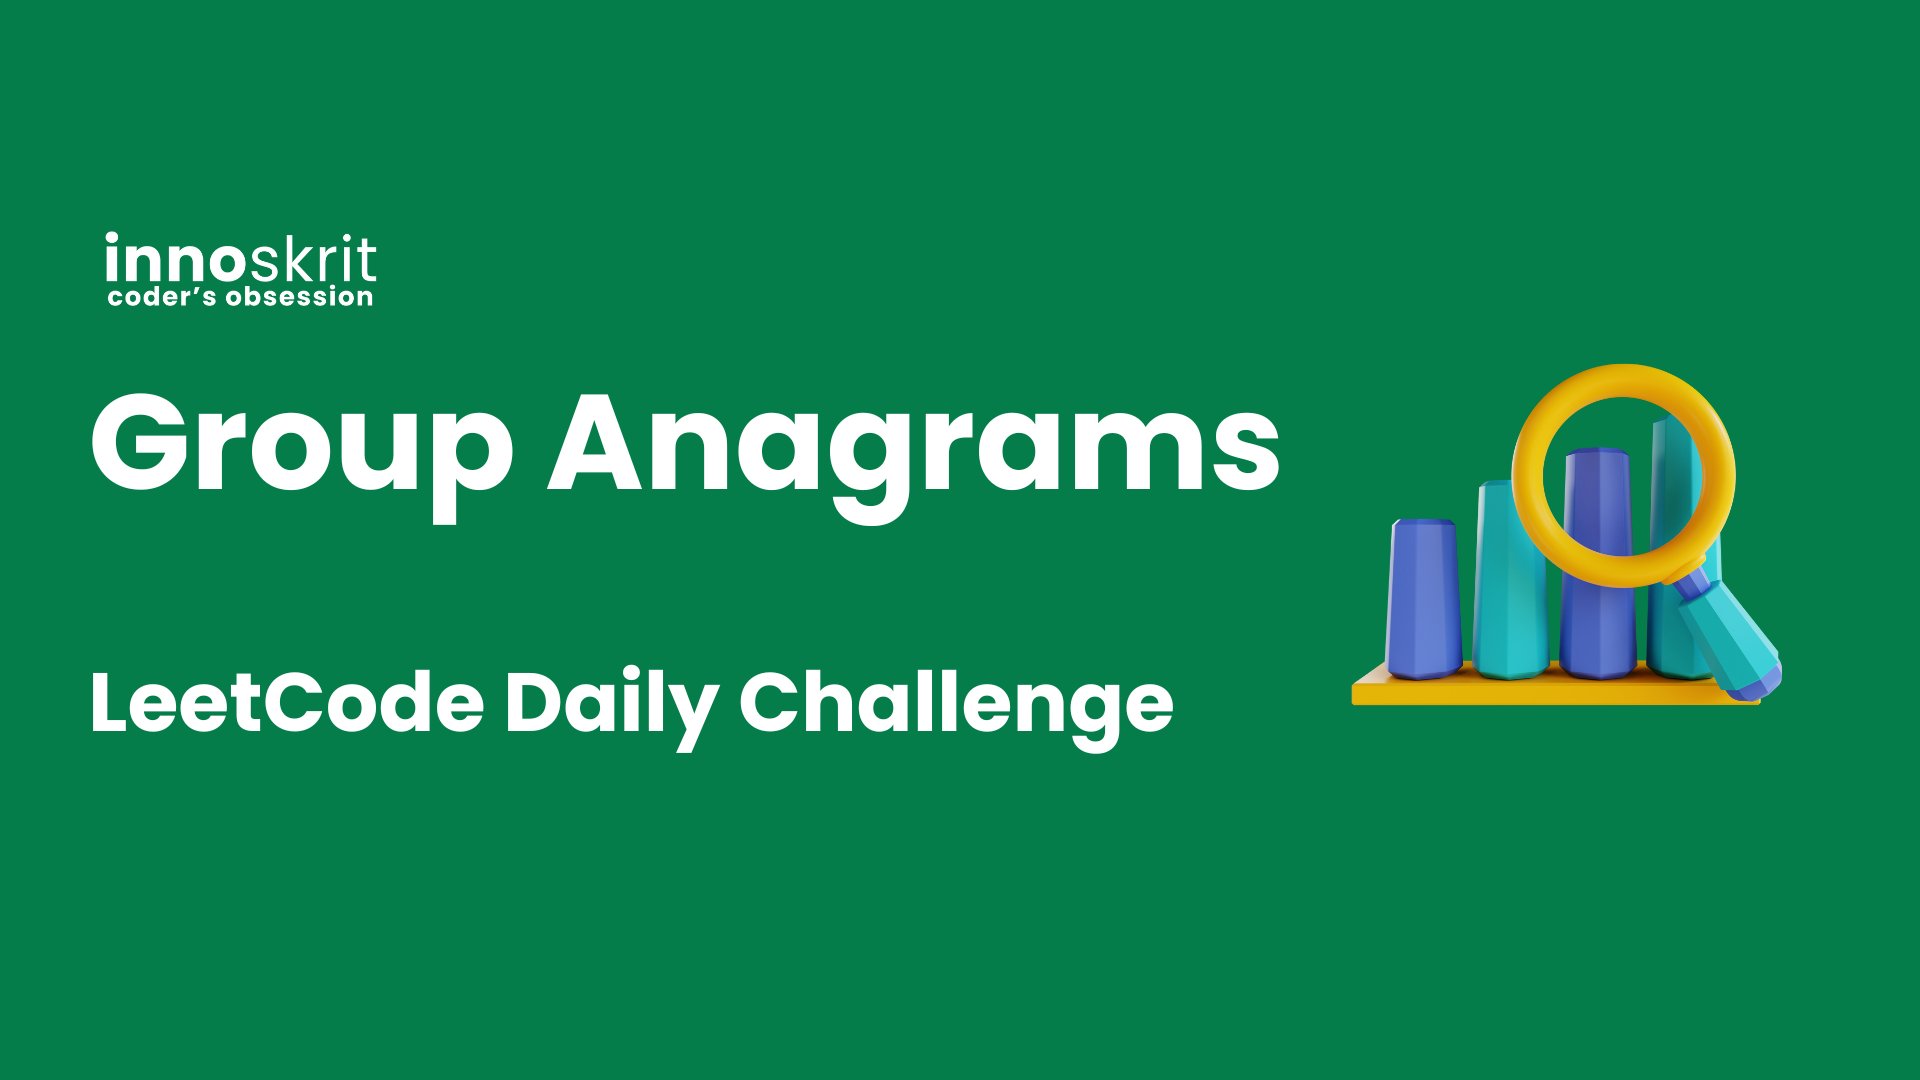 Group Anagrams - LeetCode Daily Challenge